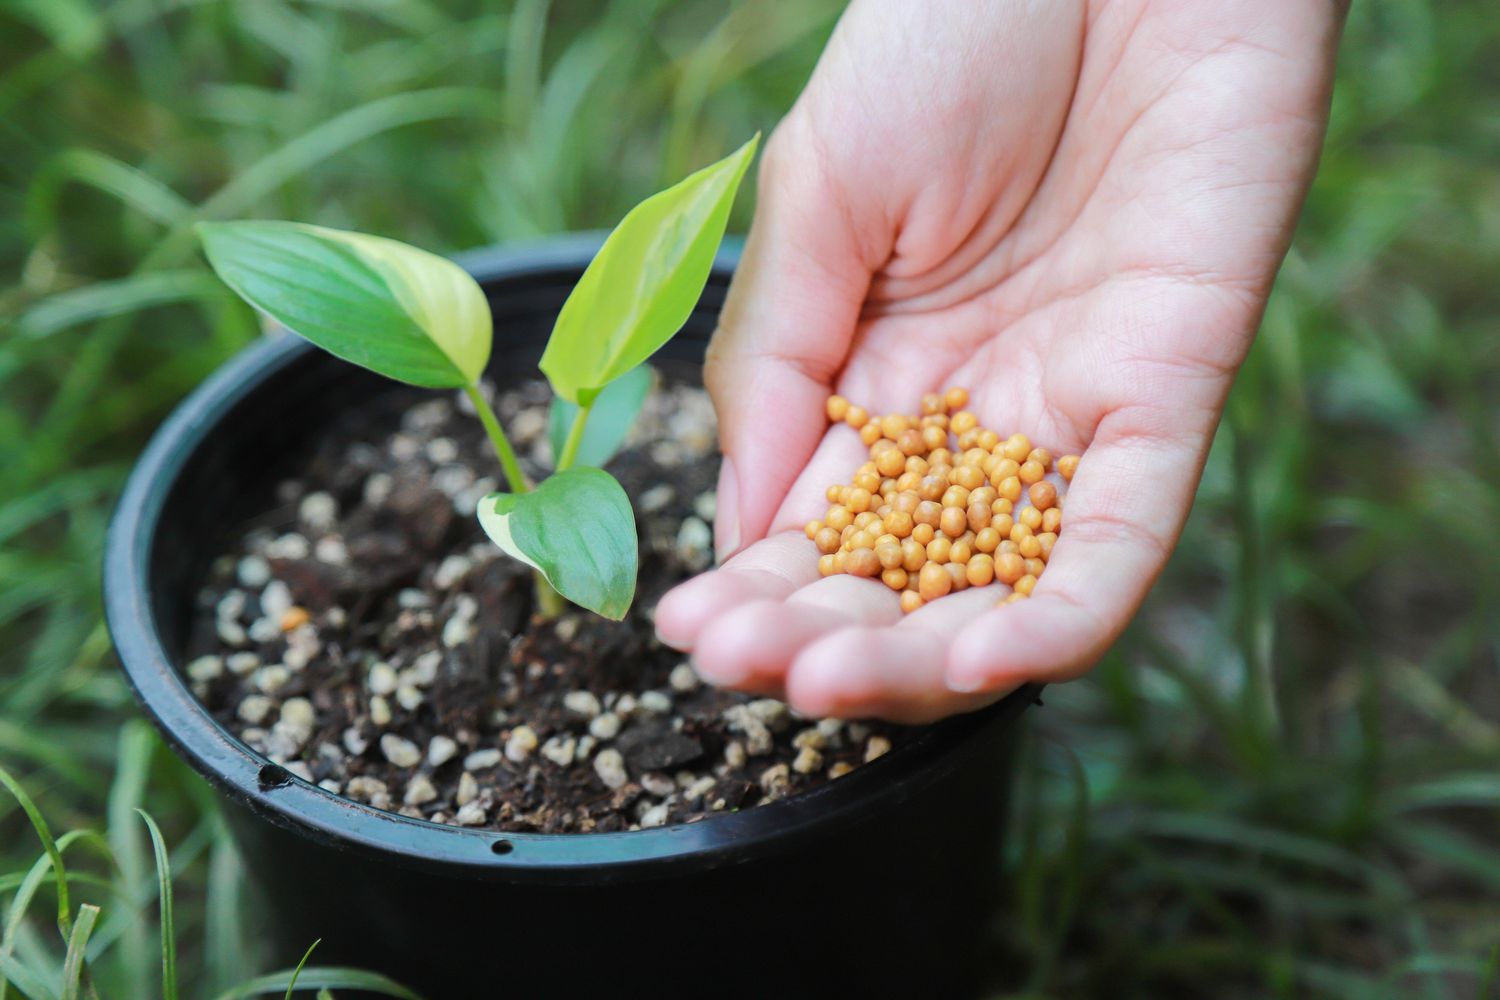 What Are The Types Of Fertilizer